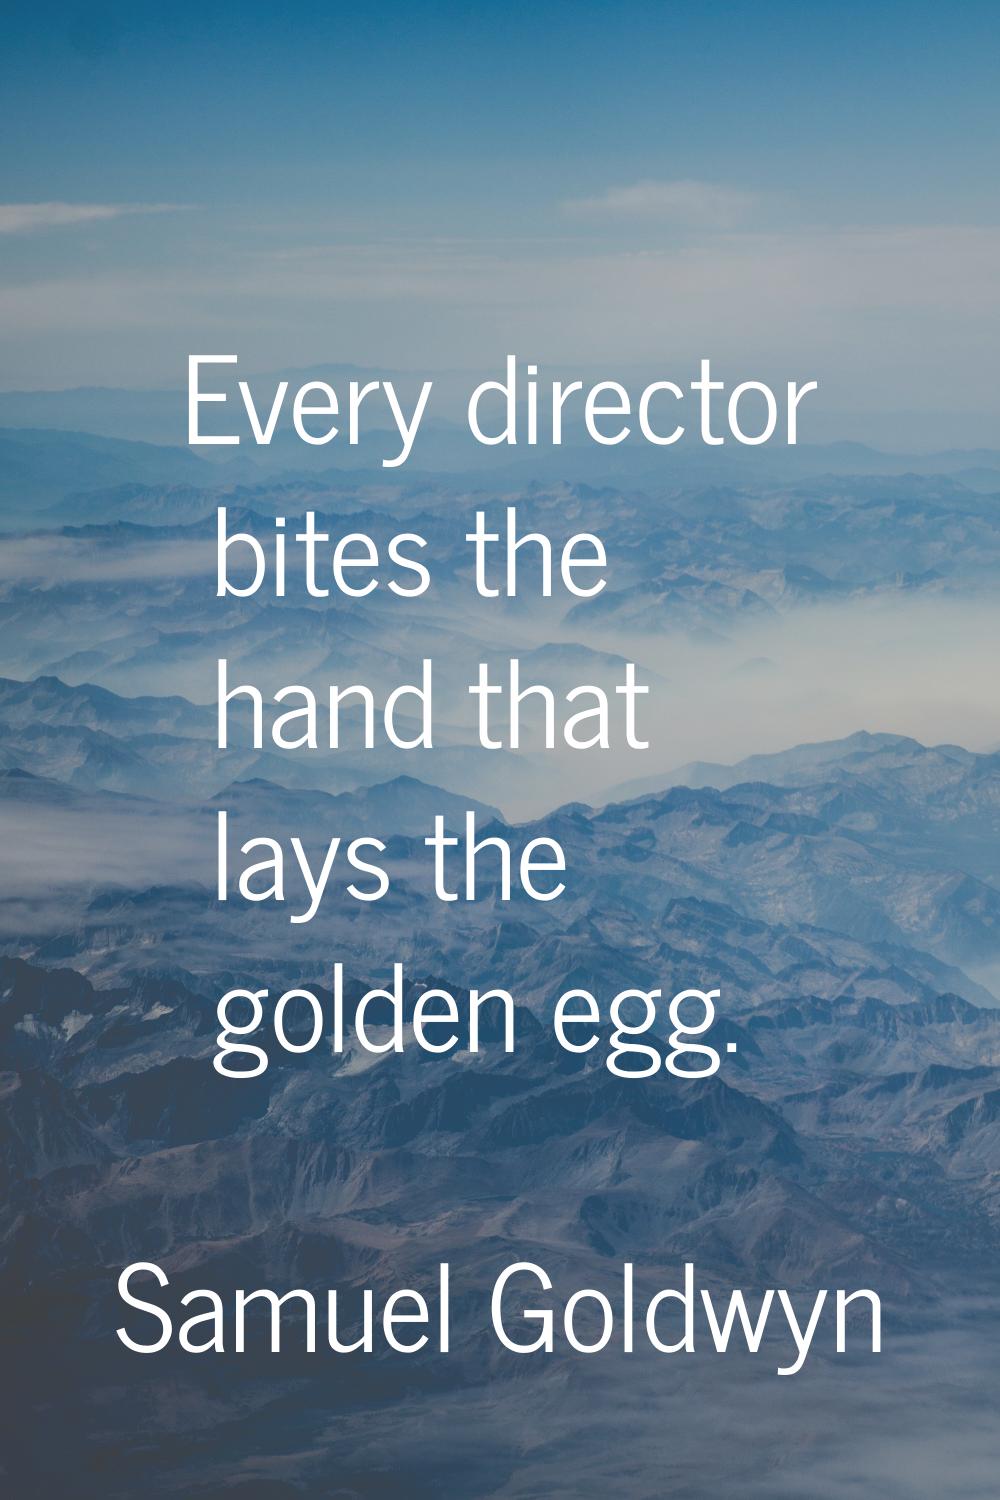 Every director bites the hand that lays the golden egg.